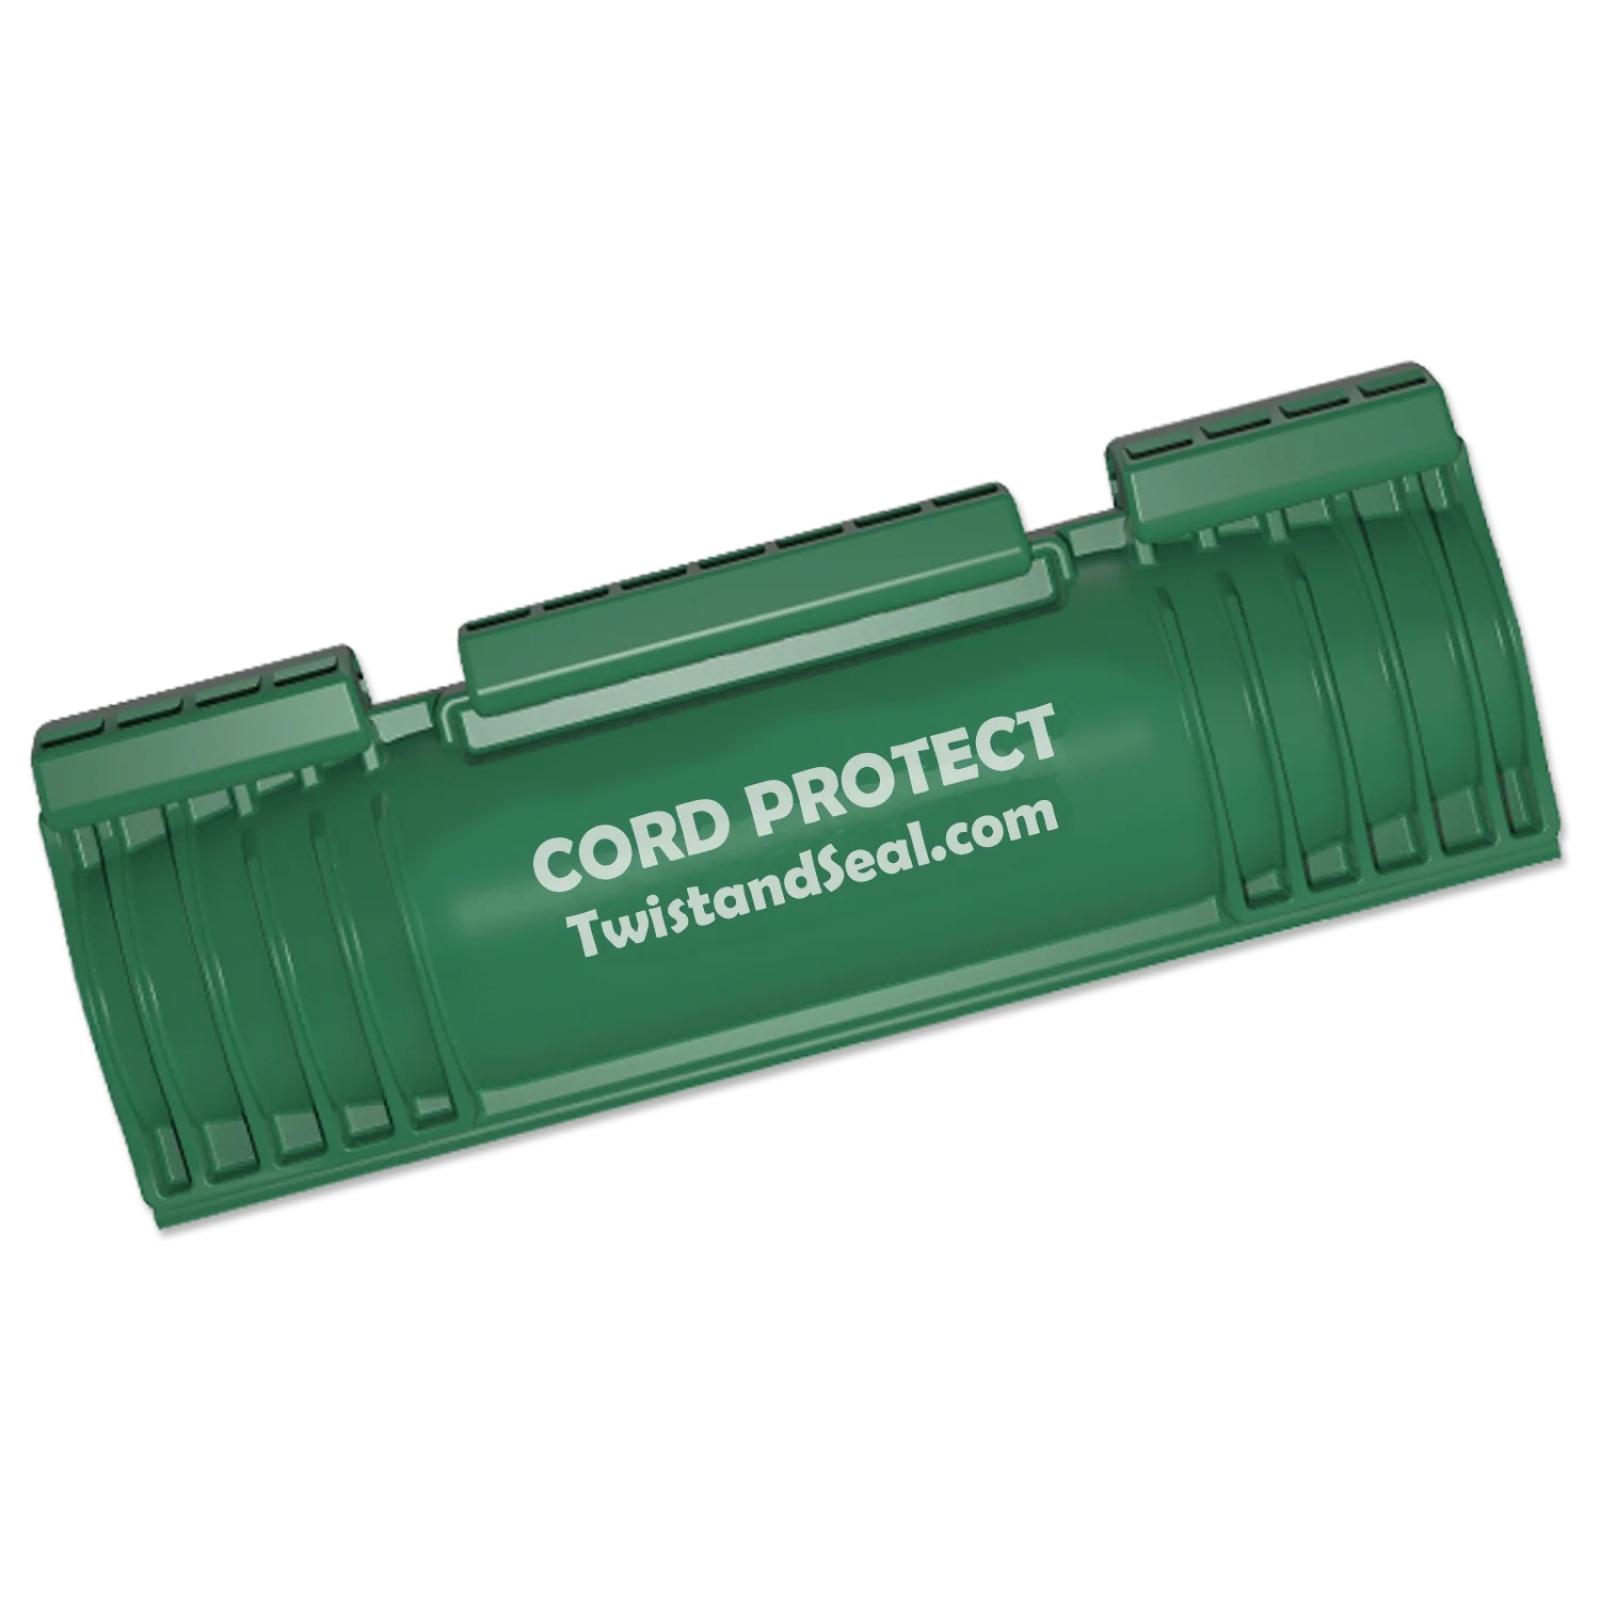 Twist and Seal Cord Protect